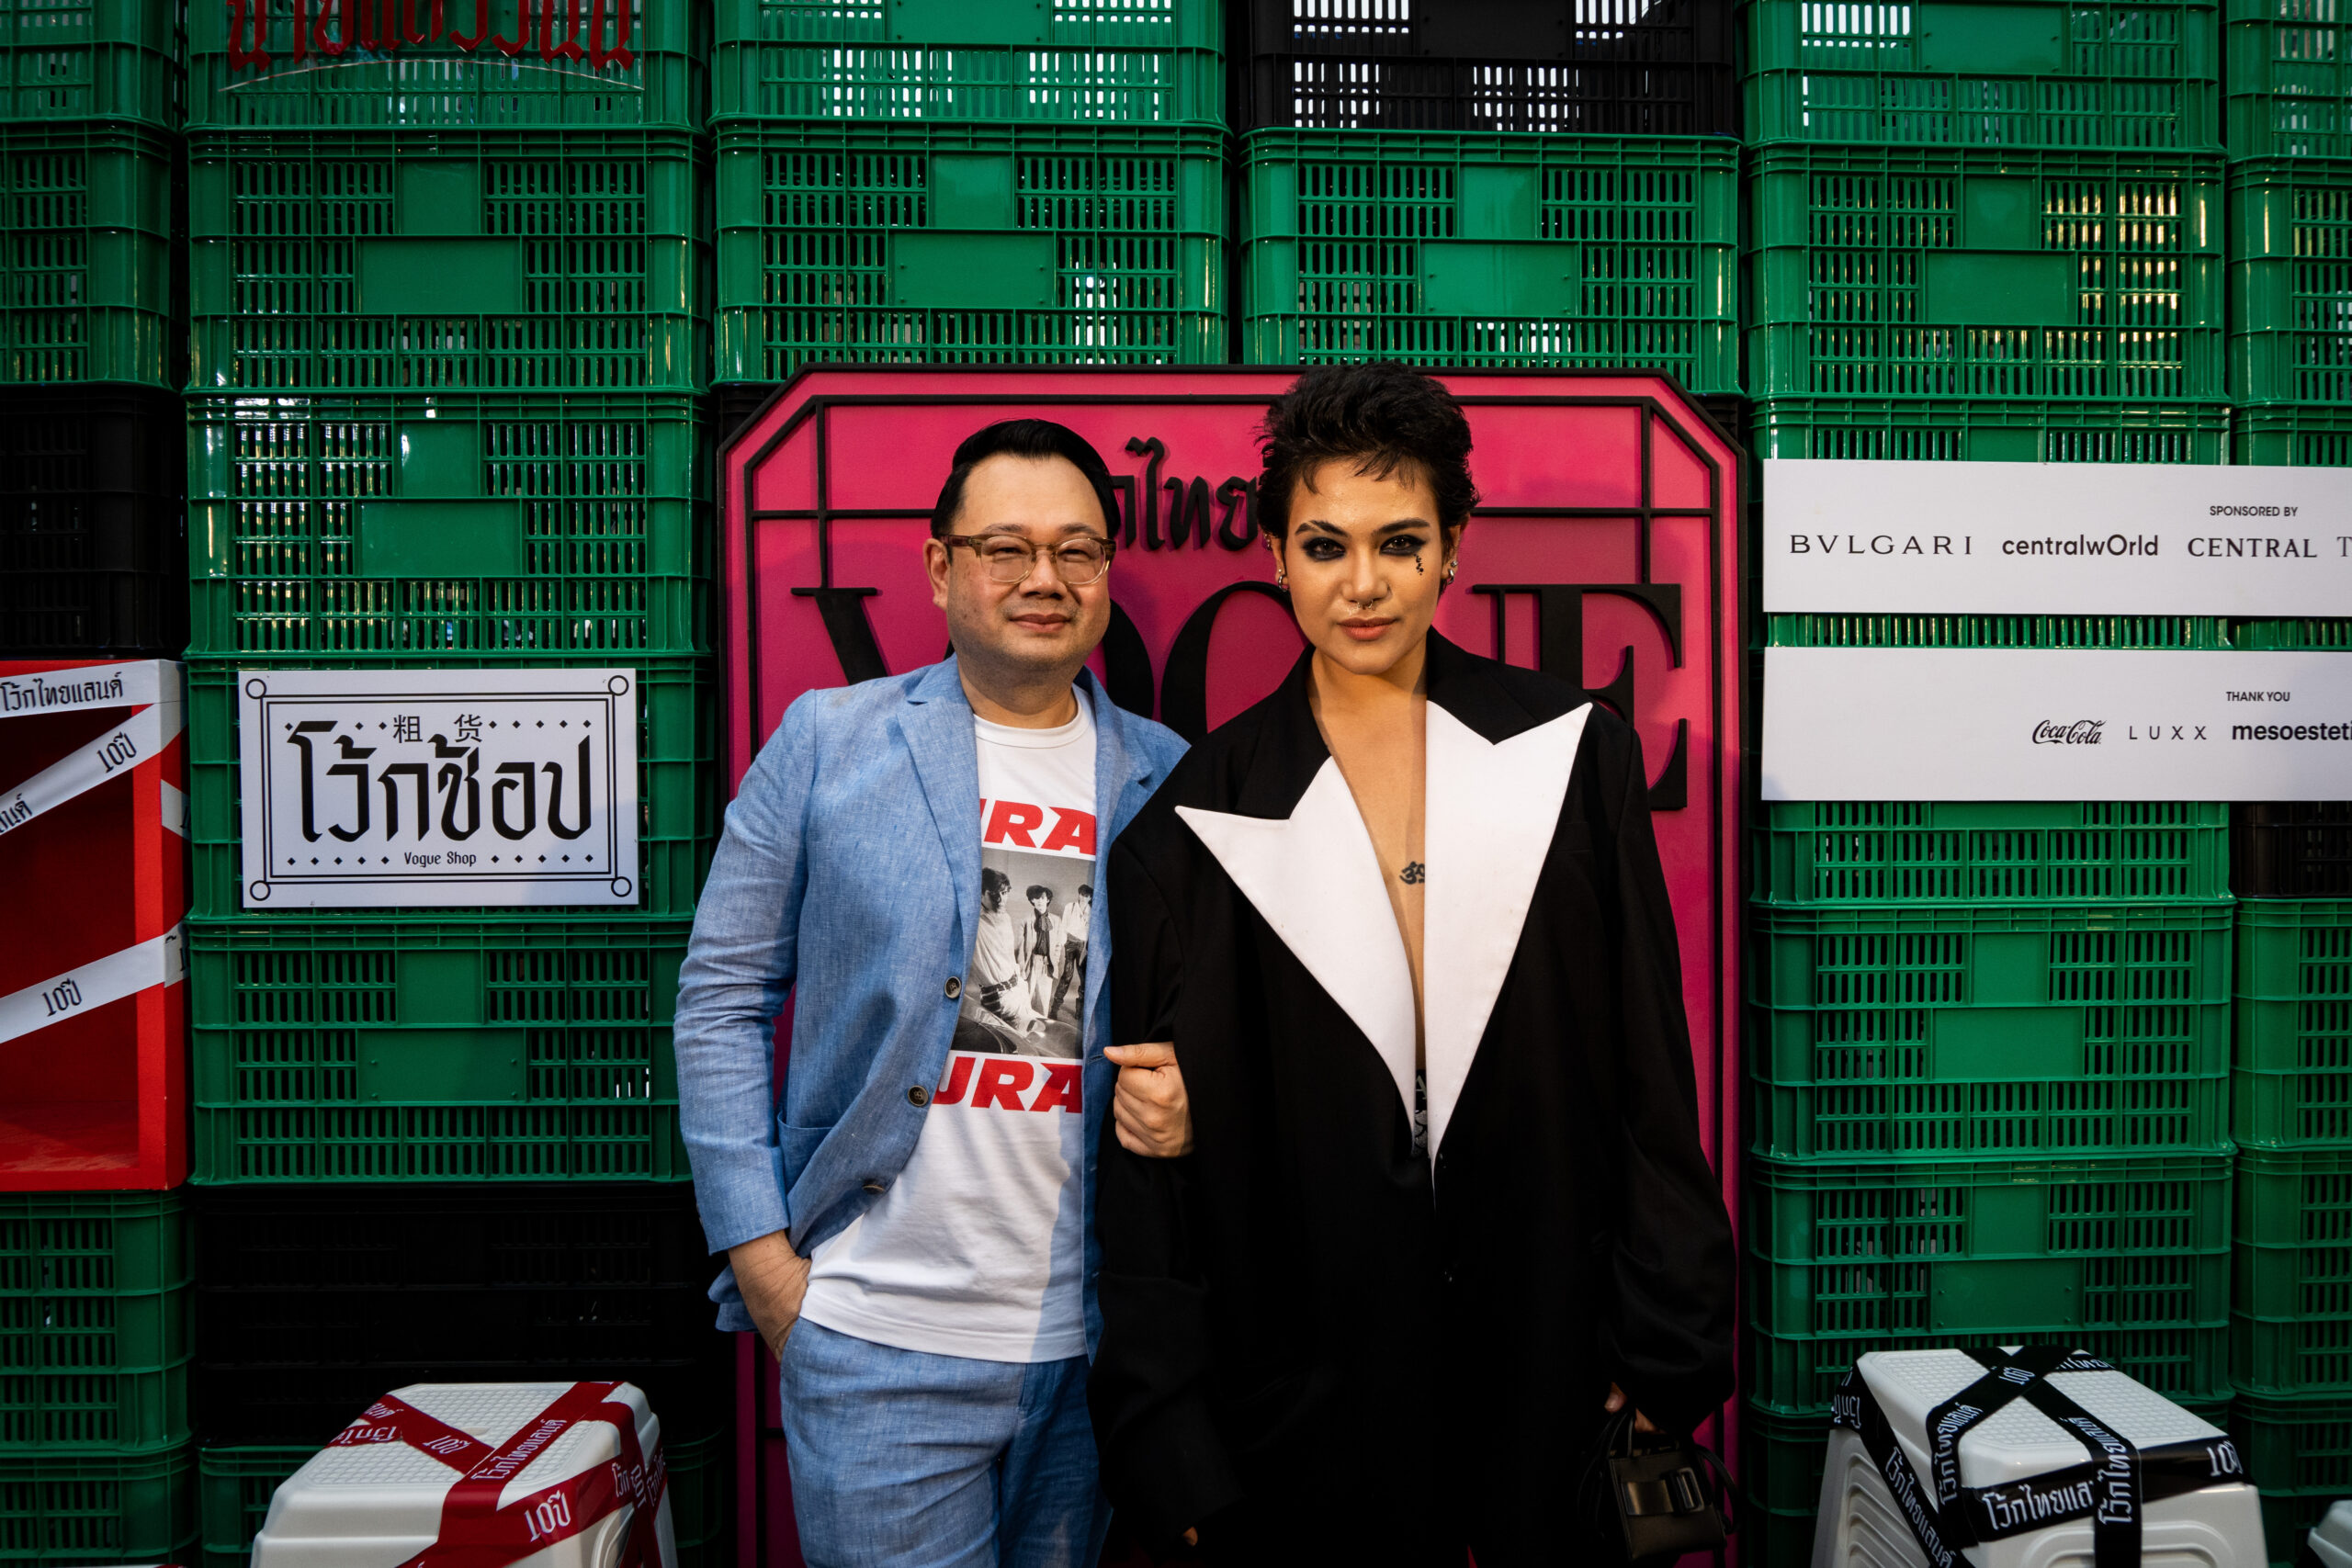 Kullawit 'Ford' Laosuksri, Editor-in-Chief of VOGUE Thailand (L) and SILVY (R) pose for a photo before the runway show. VOGUE celebrates the 10th anniversary of its magazine in Thailand with a fashion show spotlighting Thai designers at Central World Square in Bangkok, Thailand, on March 10, 2023.